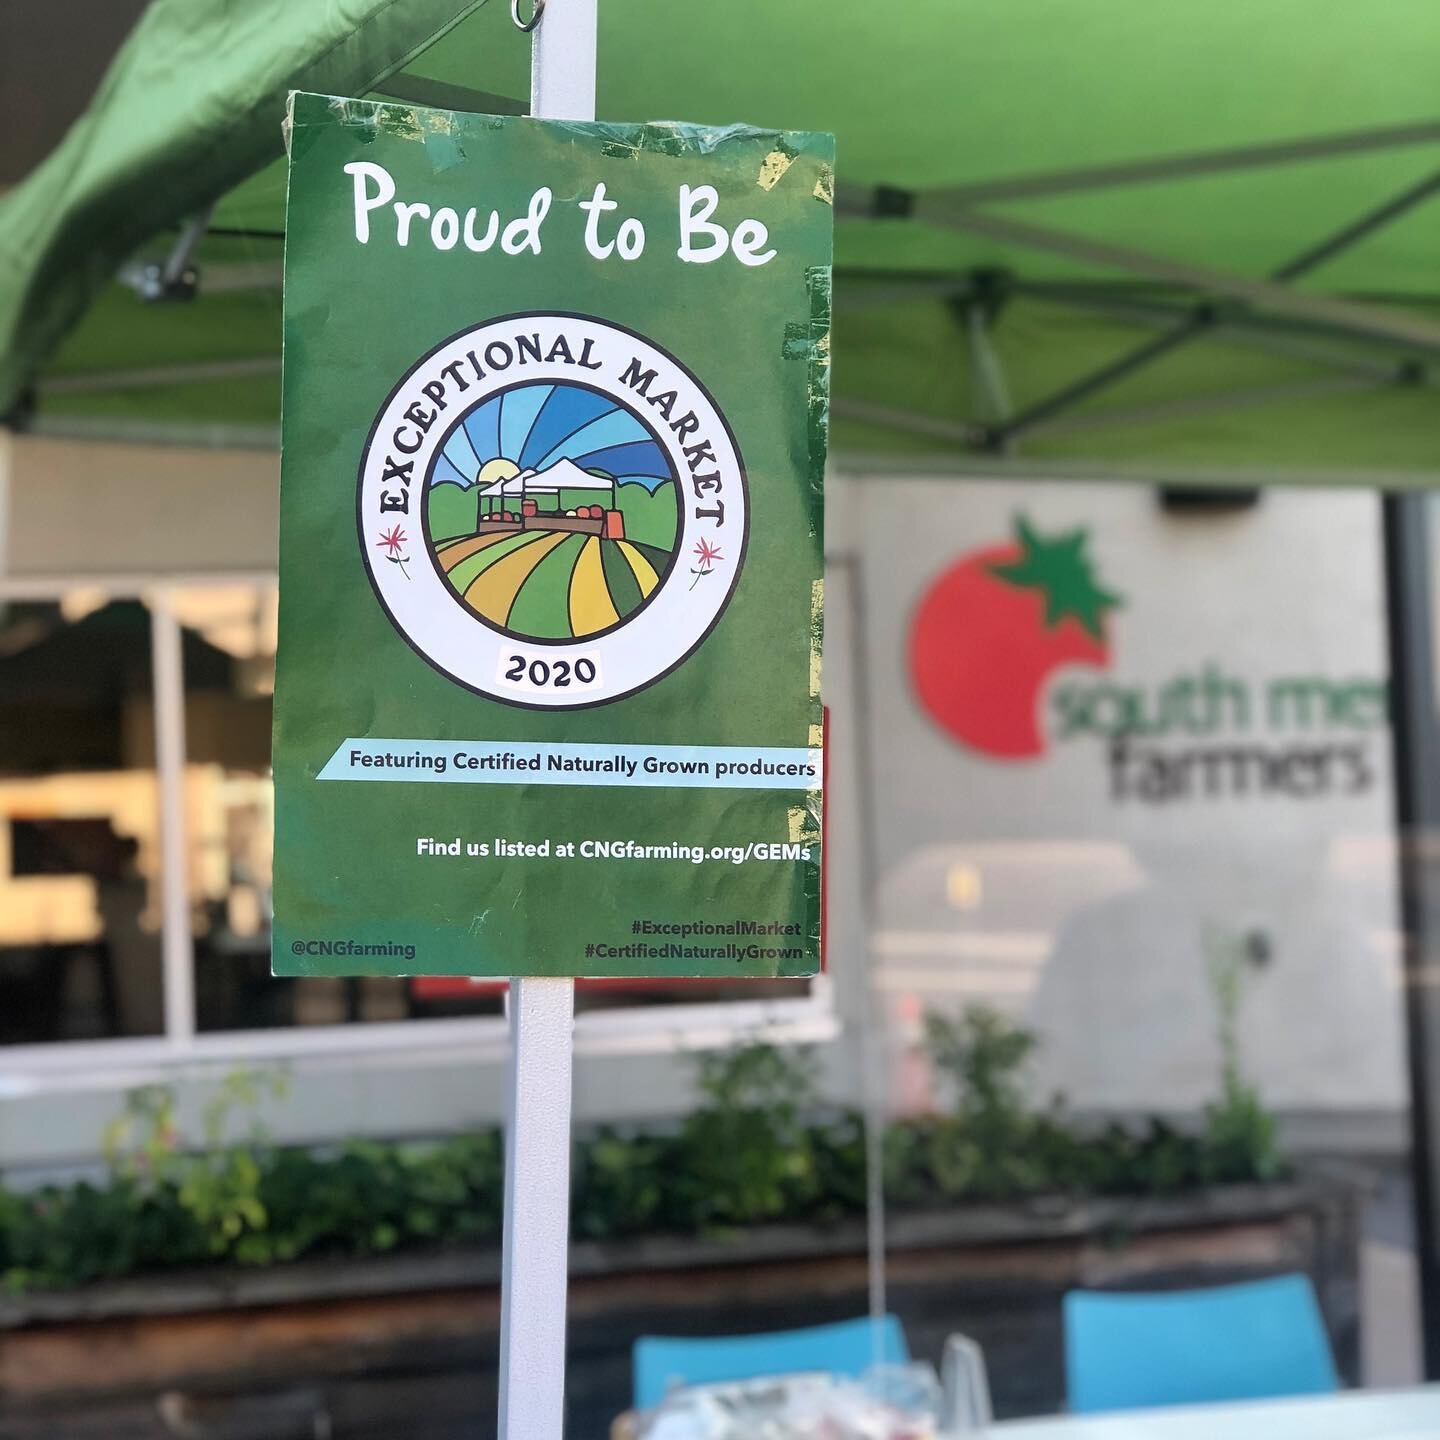 We are proud to be apart of the CNG farming family! We are open today from 8:00 am - 1:00 pm! #southmemphisfarmersmarket #exceptionalmarket #certifiednaturallygrown